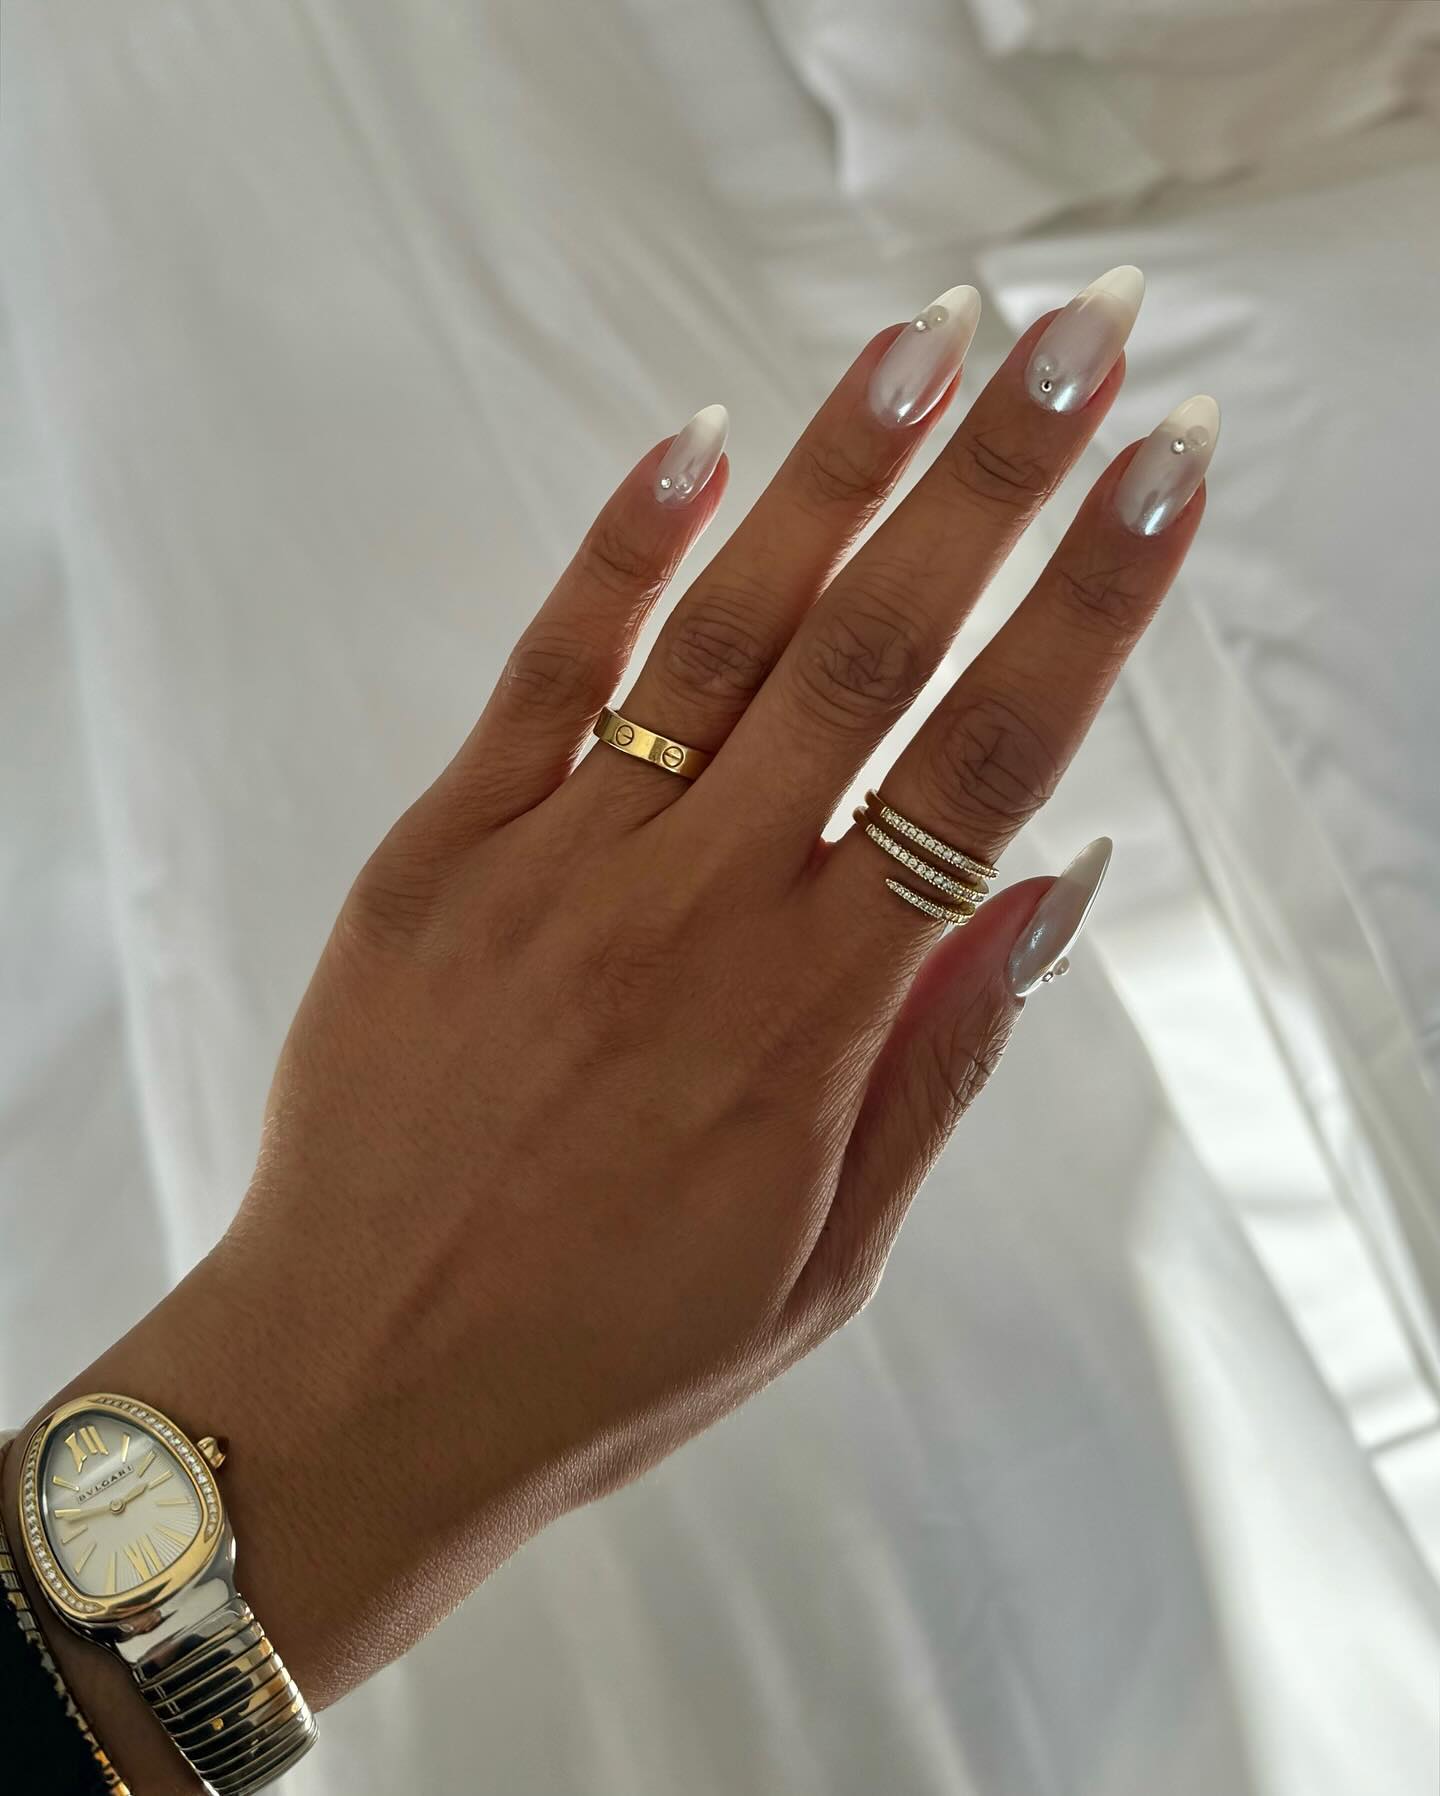 @iramshelton chrome and pearl French tip manicure